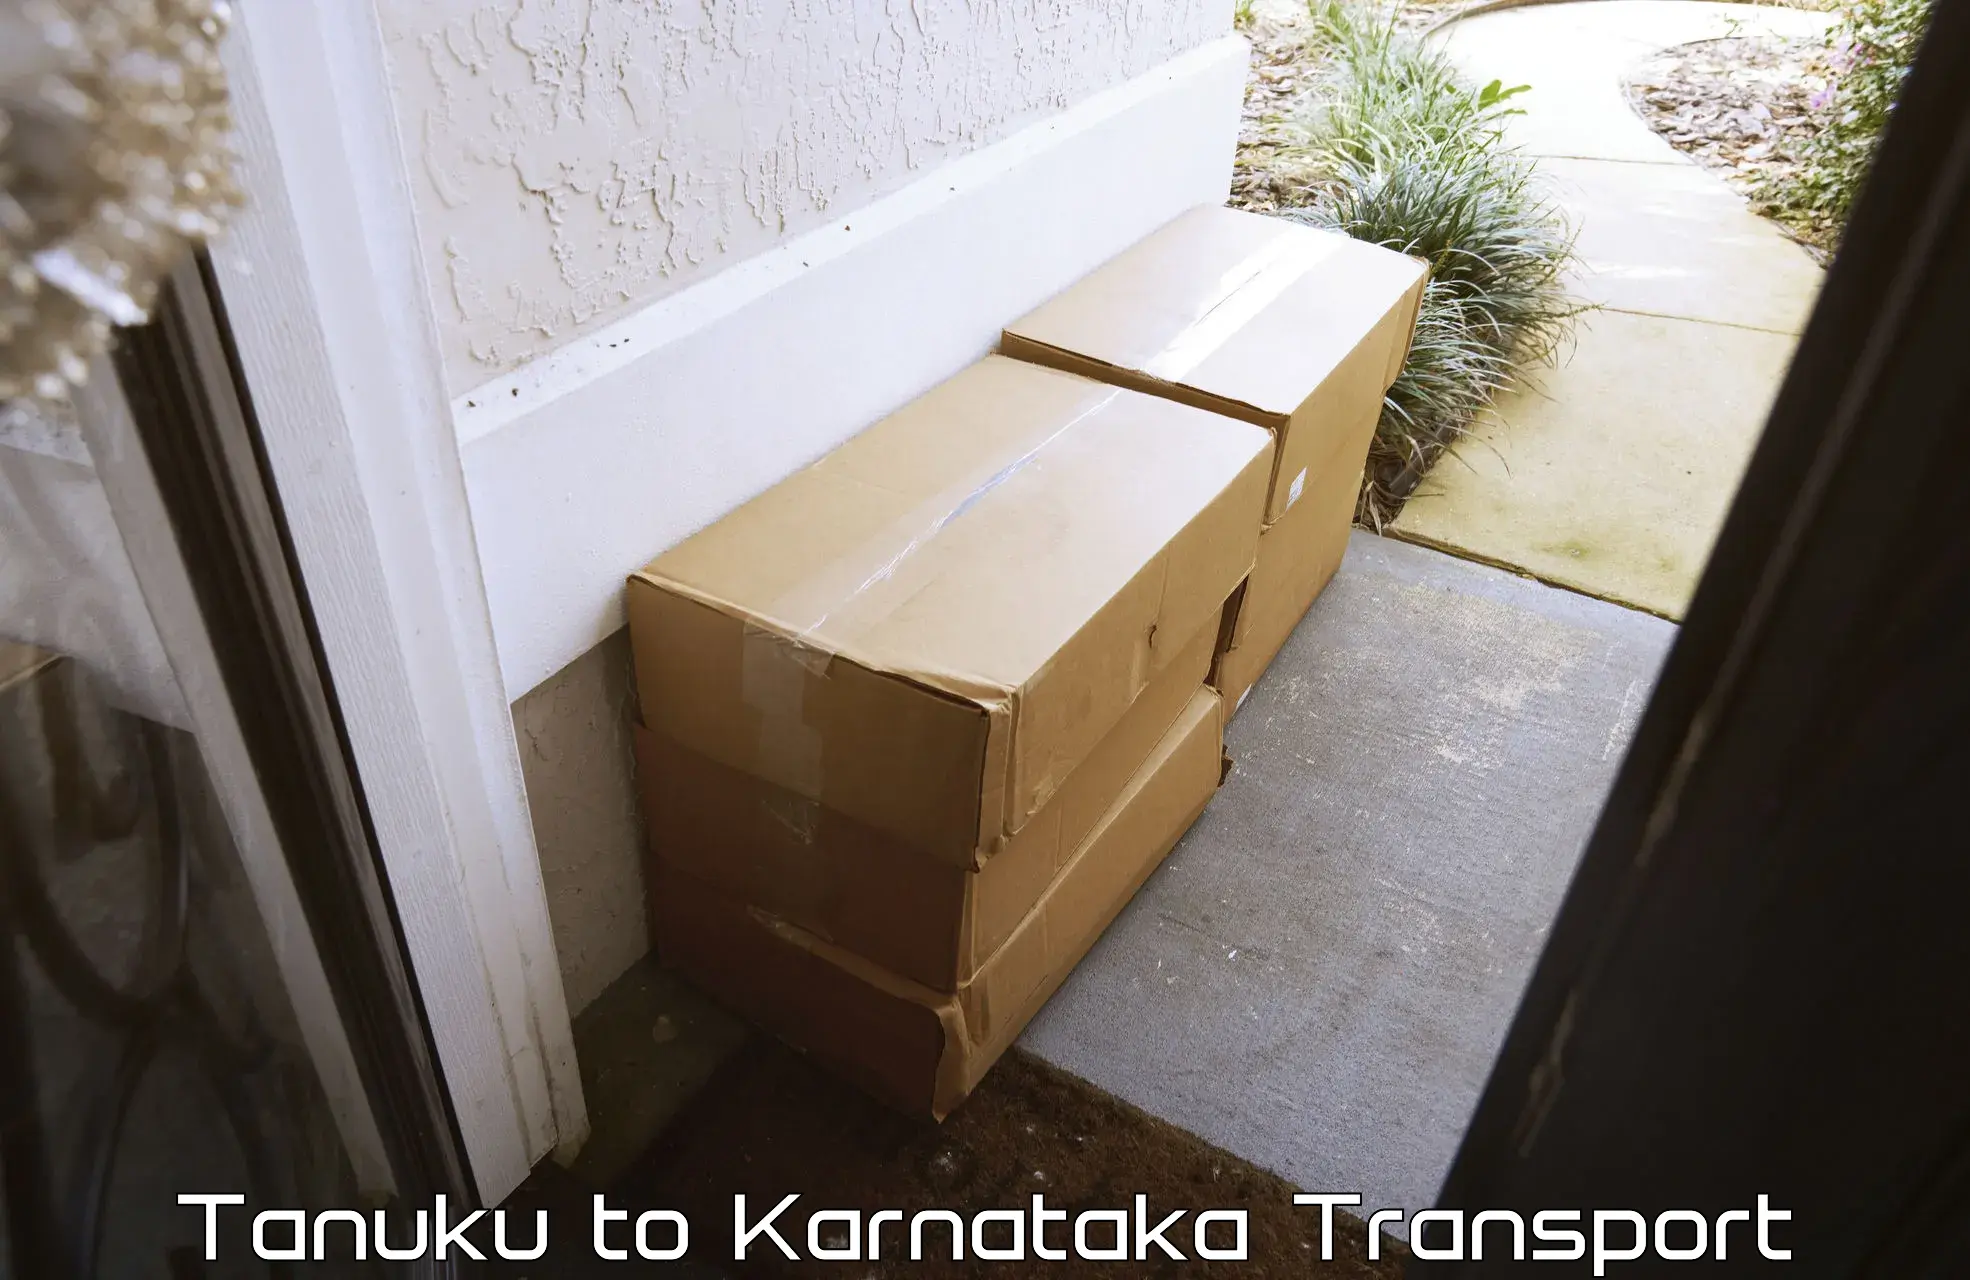 Commercial transport service Tanuku to Manipal